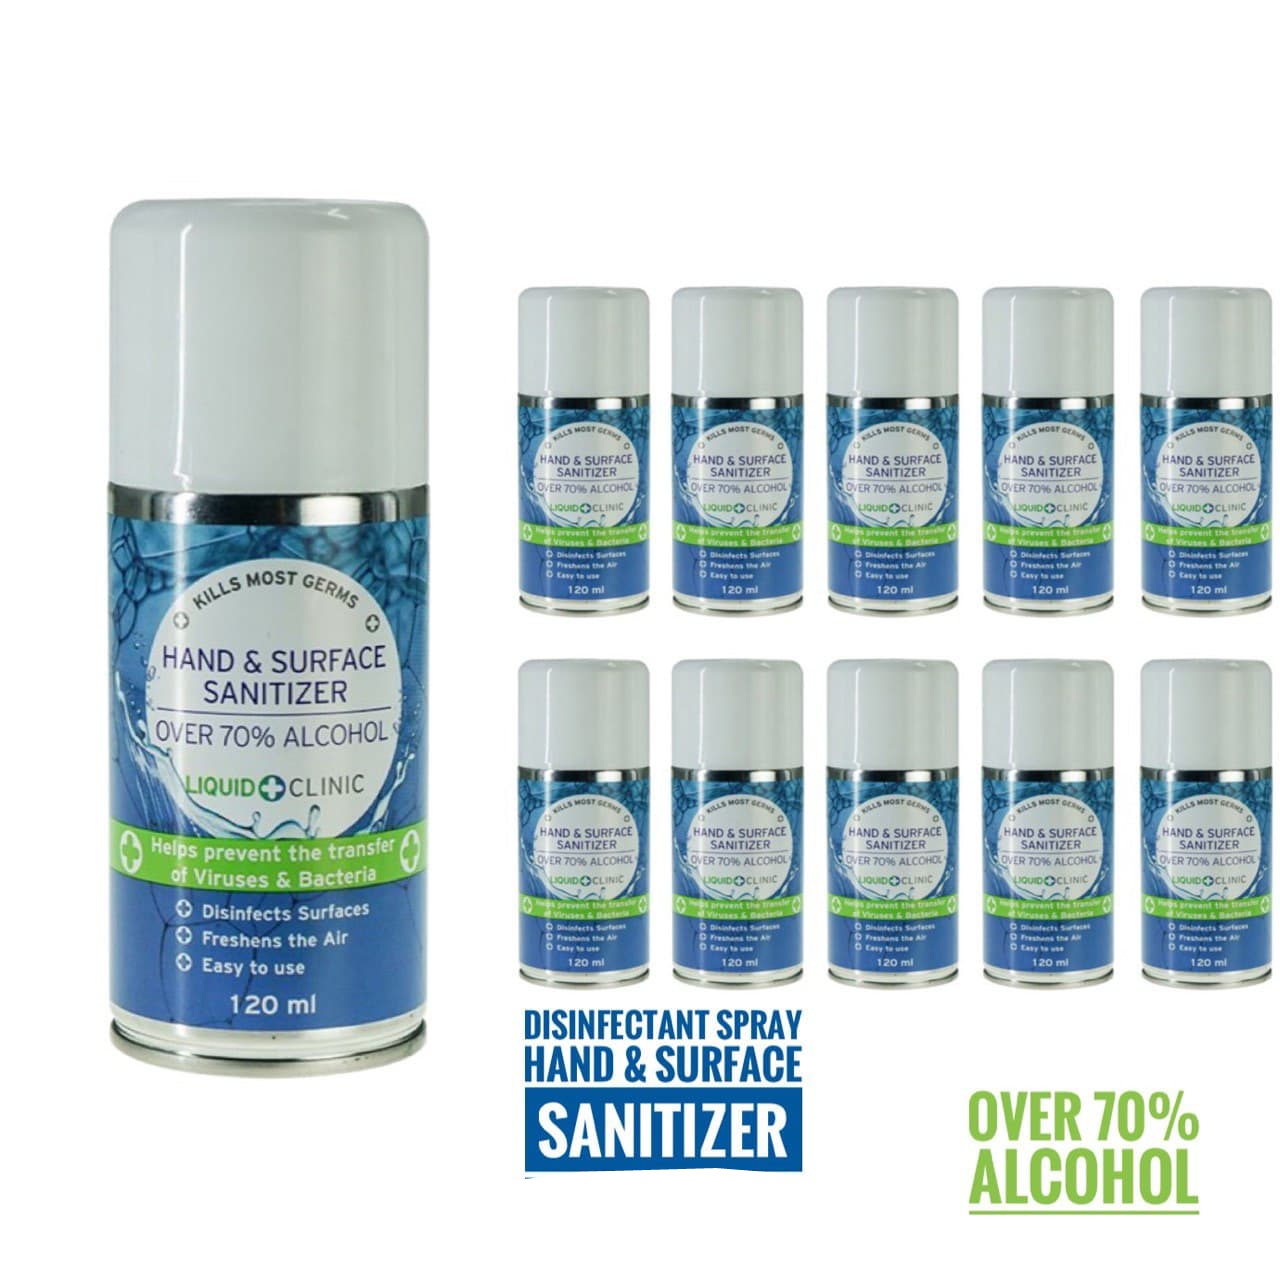 Disinfectant hand and surface sanitizer